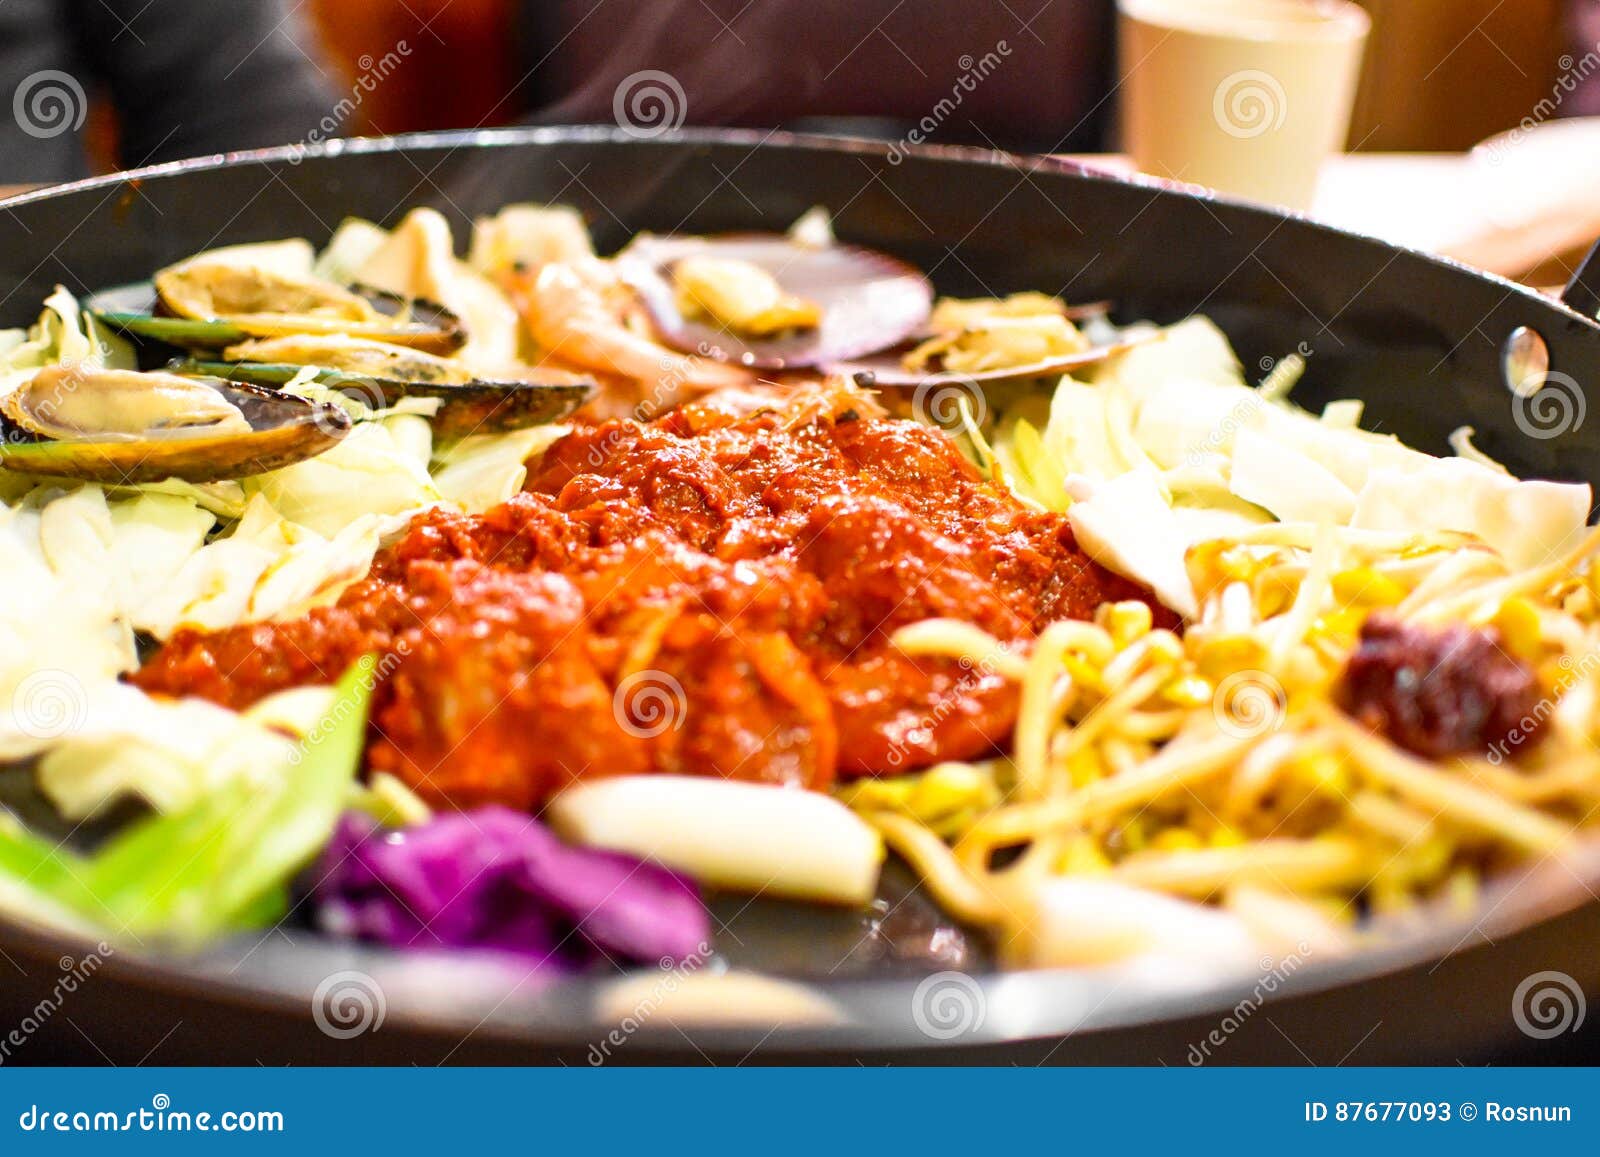 dakgalbi or spicy grilled chicken and vegetables recipe.